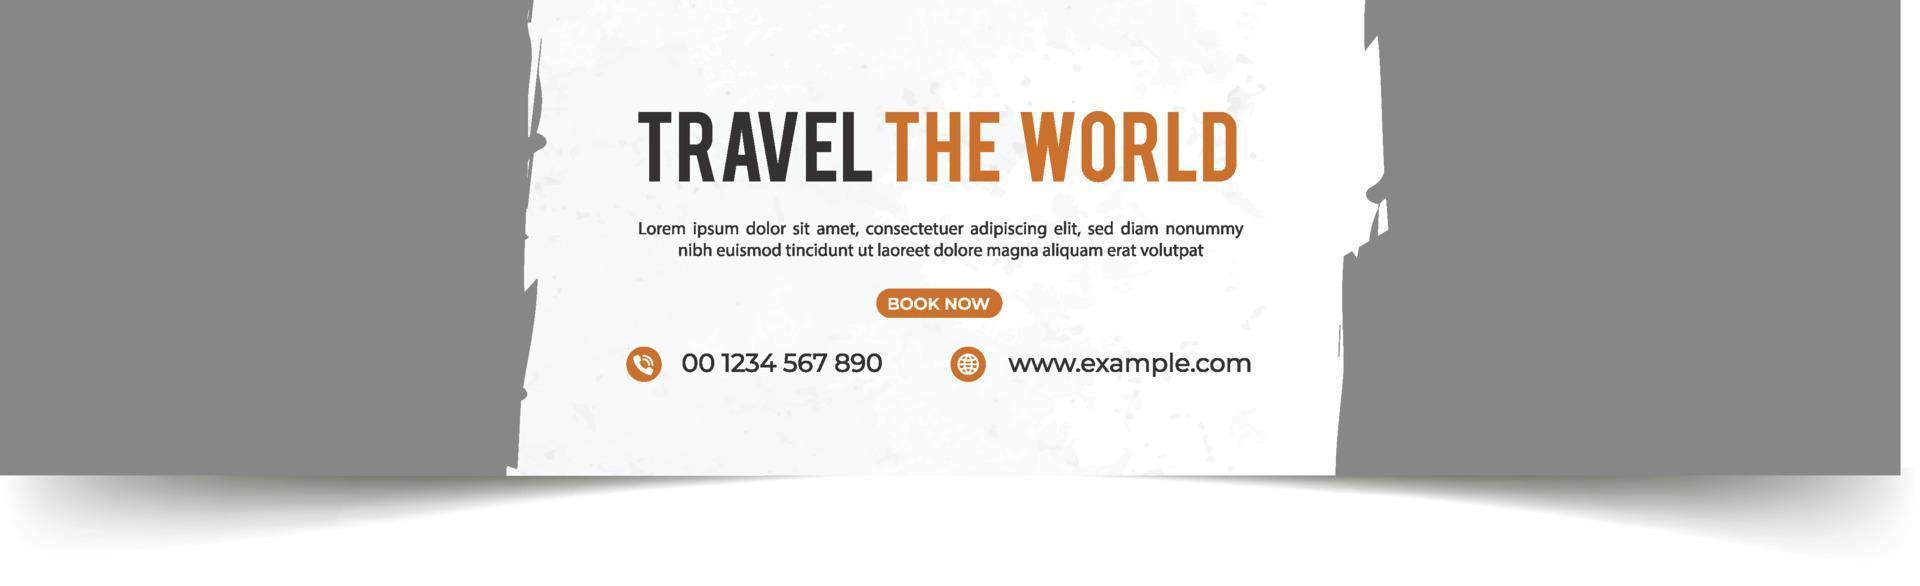 travel sale social media post template. Web banner for traveling agency business offers promotion. Holiday and tour advertising banner design. vector